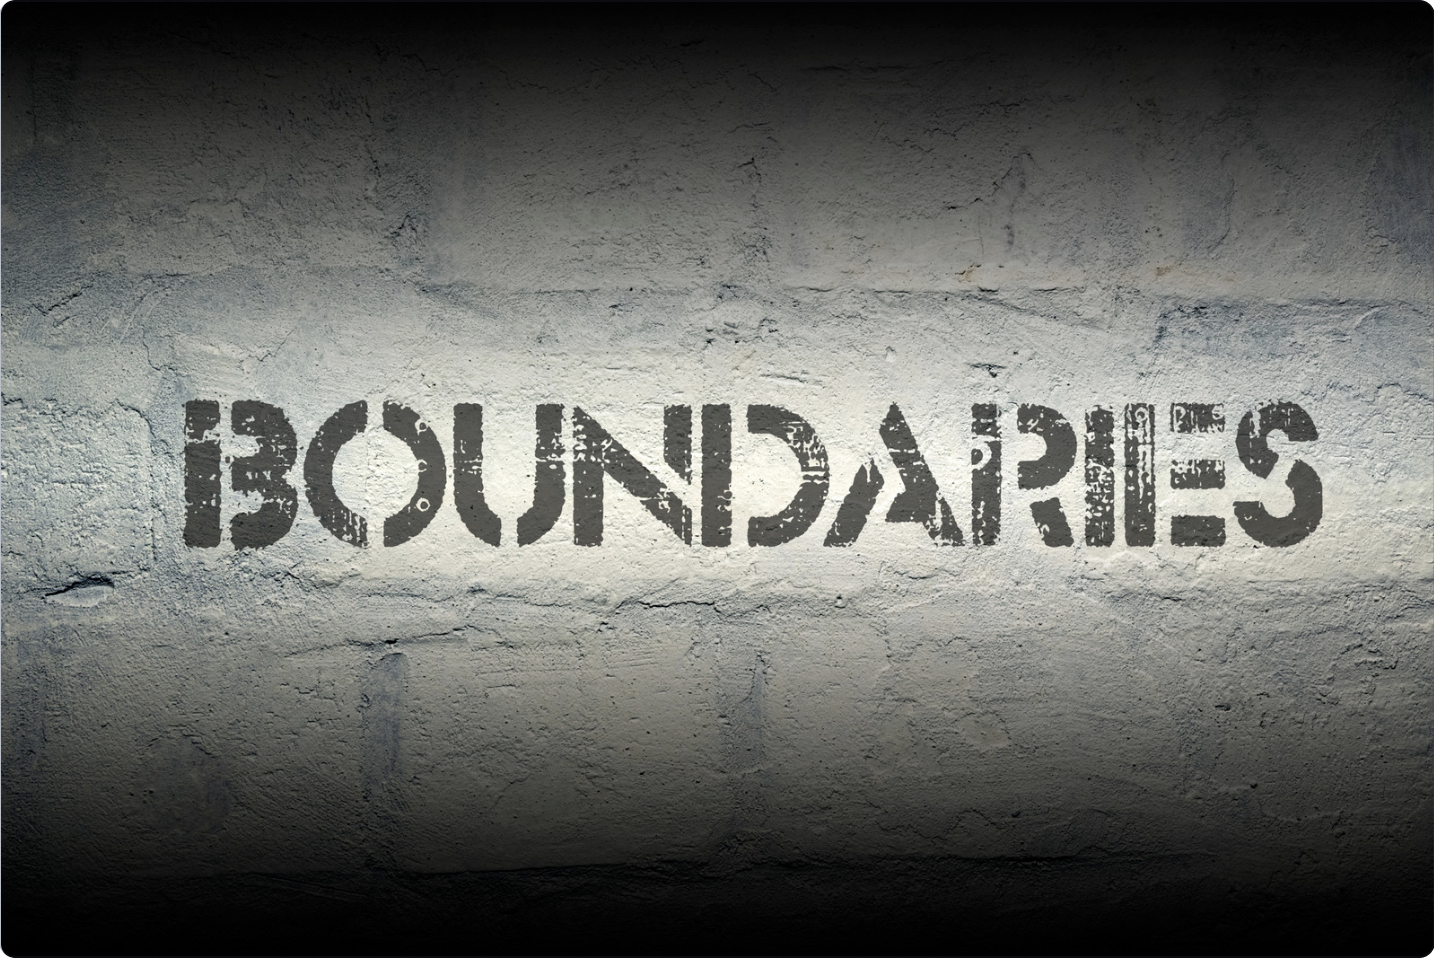 Setting boundaries in a family business